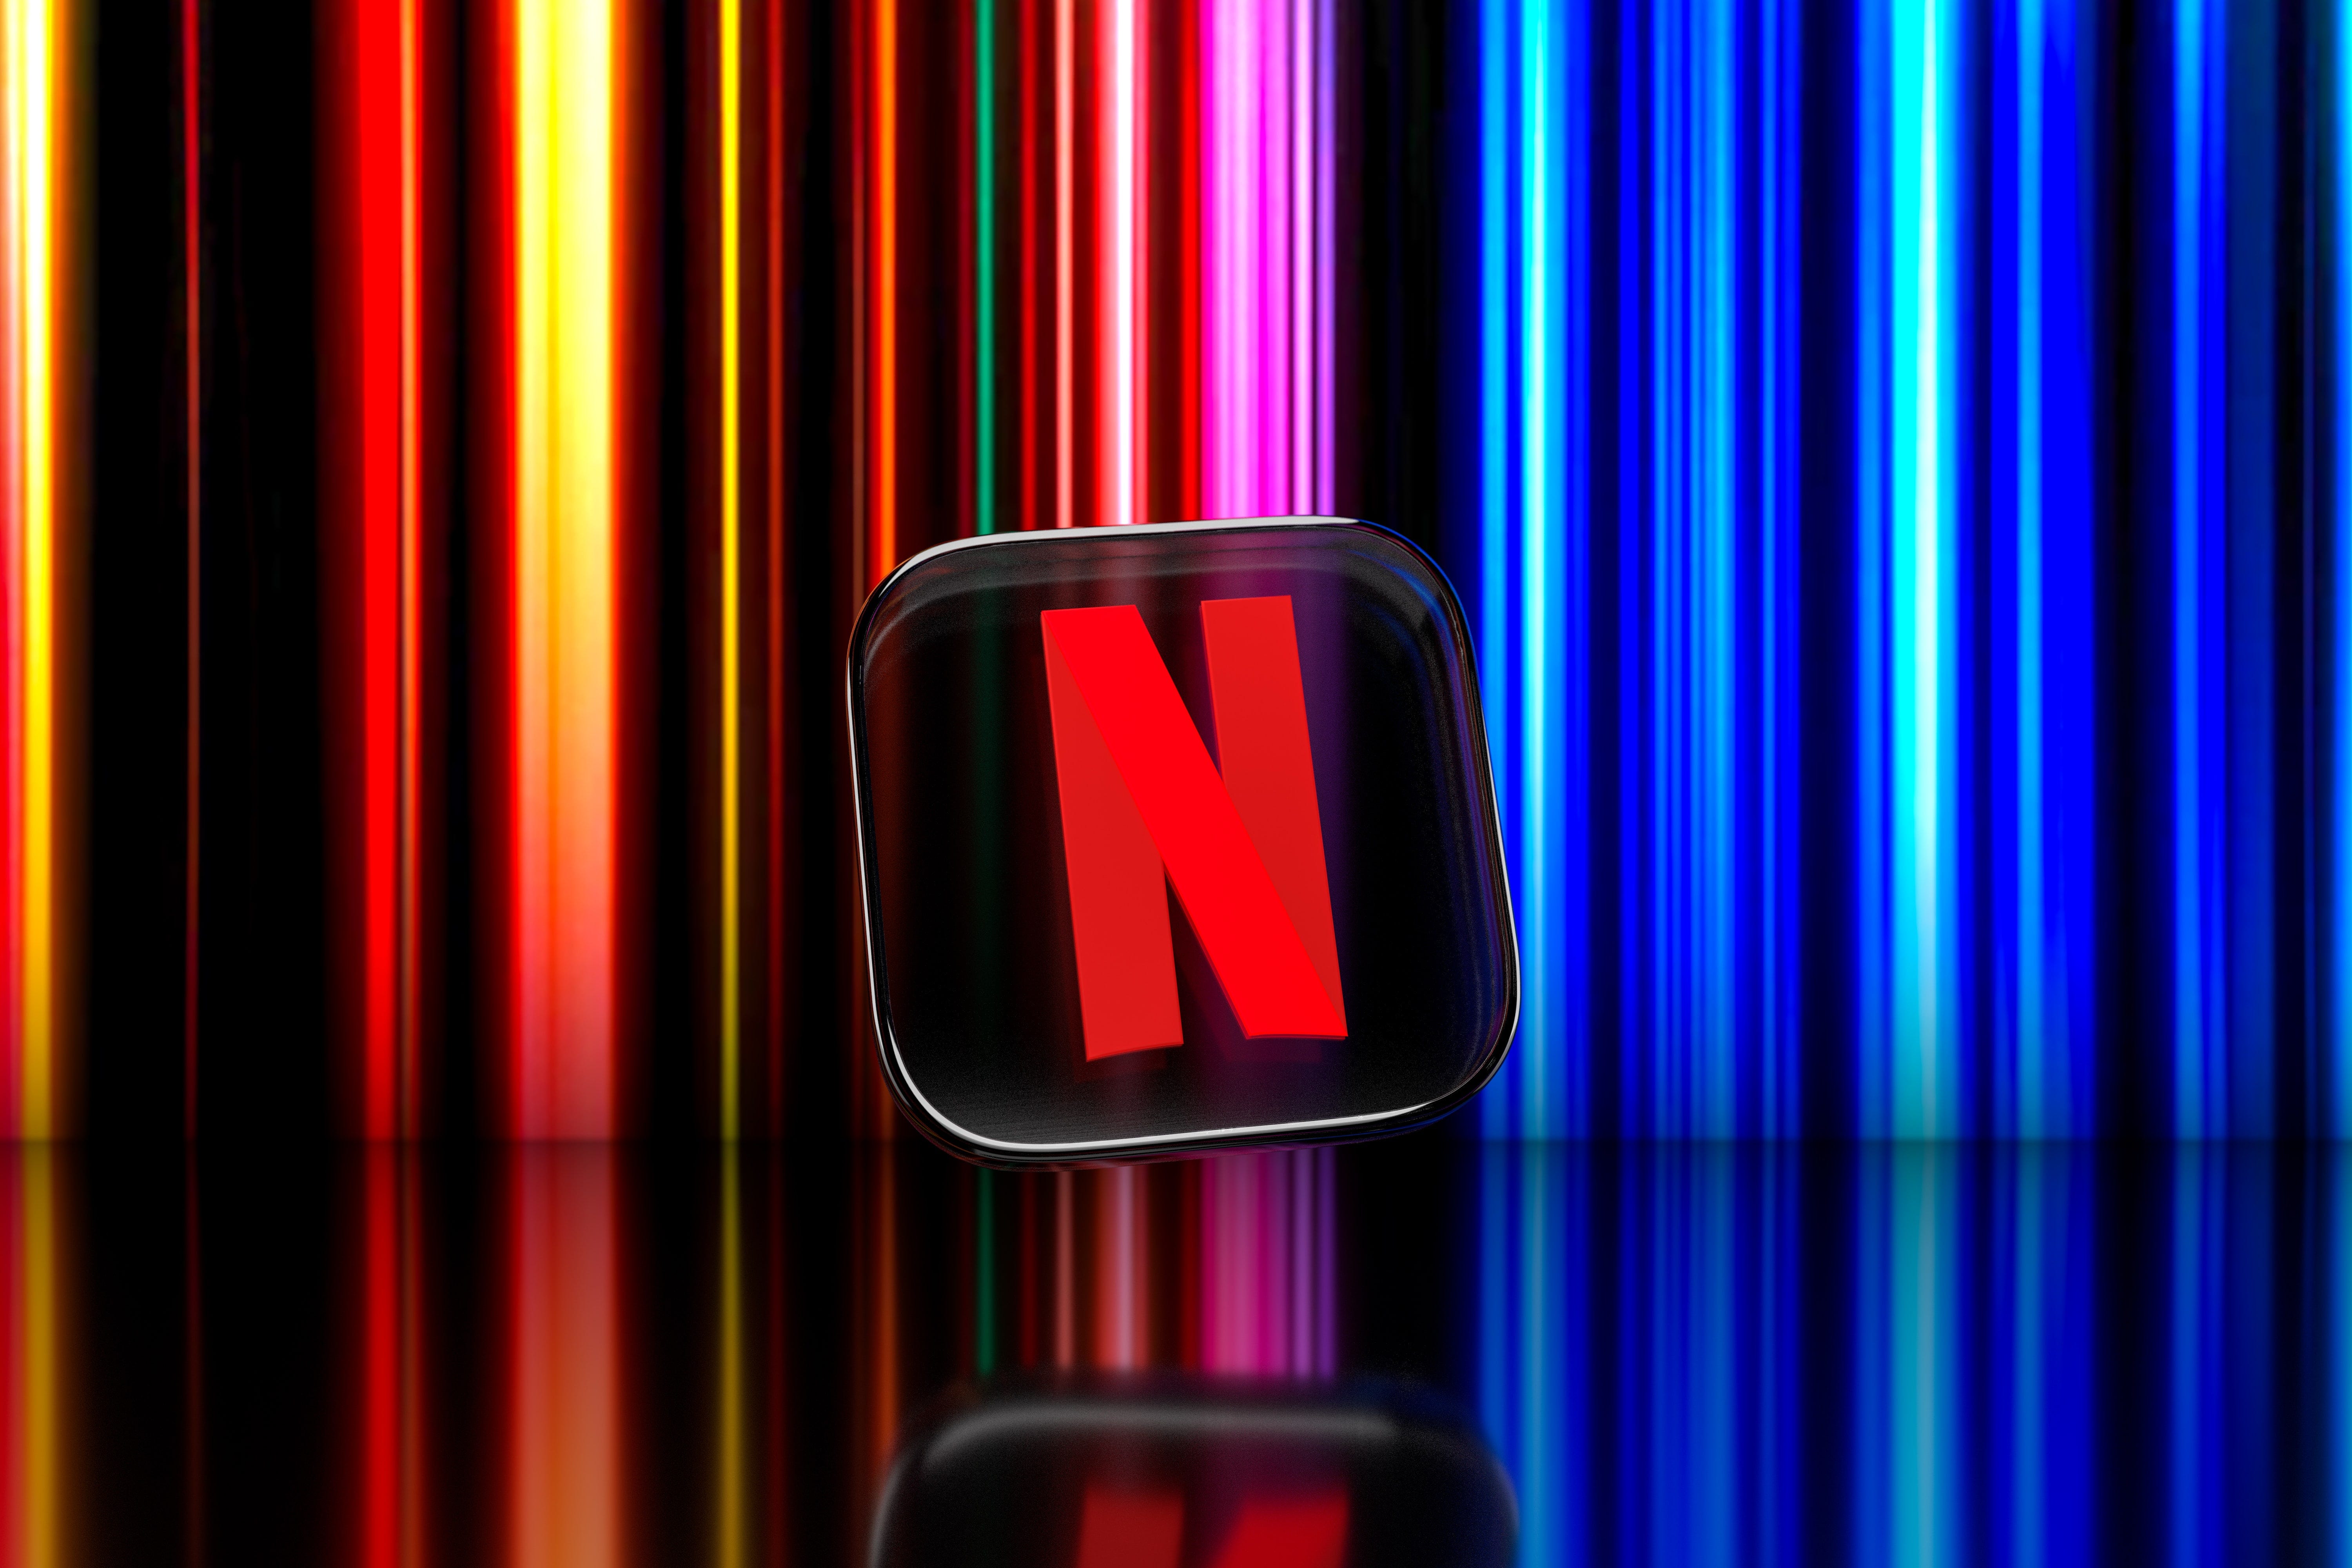 Netflix raises prices up to 17% amid new contracts, licensing costs